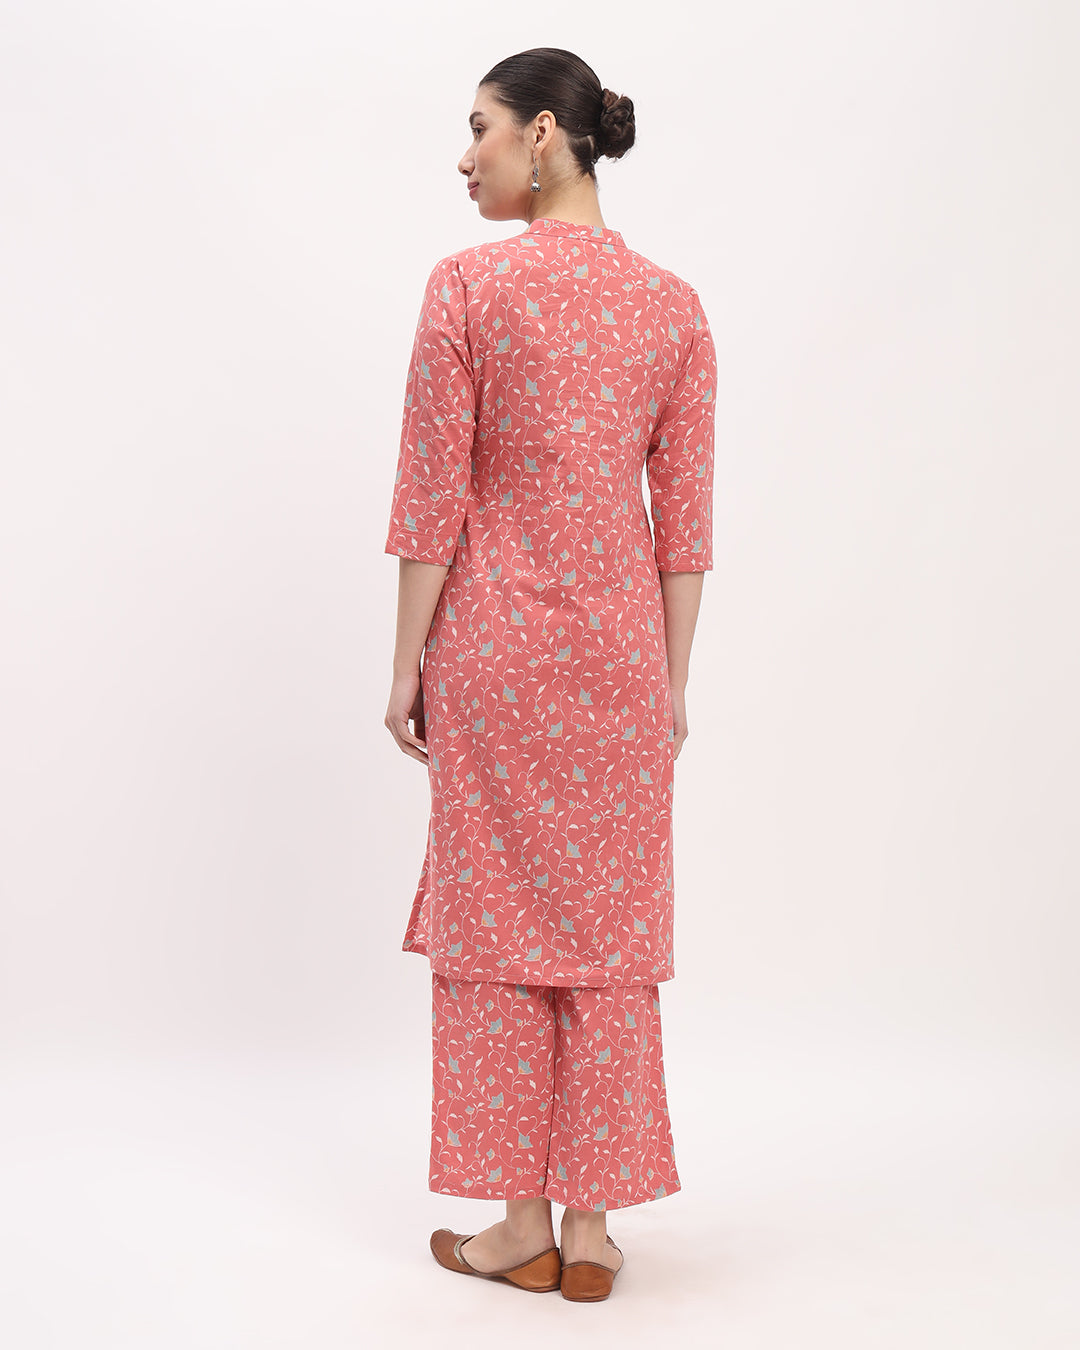 Combo: Ivory Quadrangle & English Floral Garden High-Low Printed Kurta (Without Bottoms)